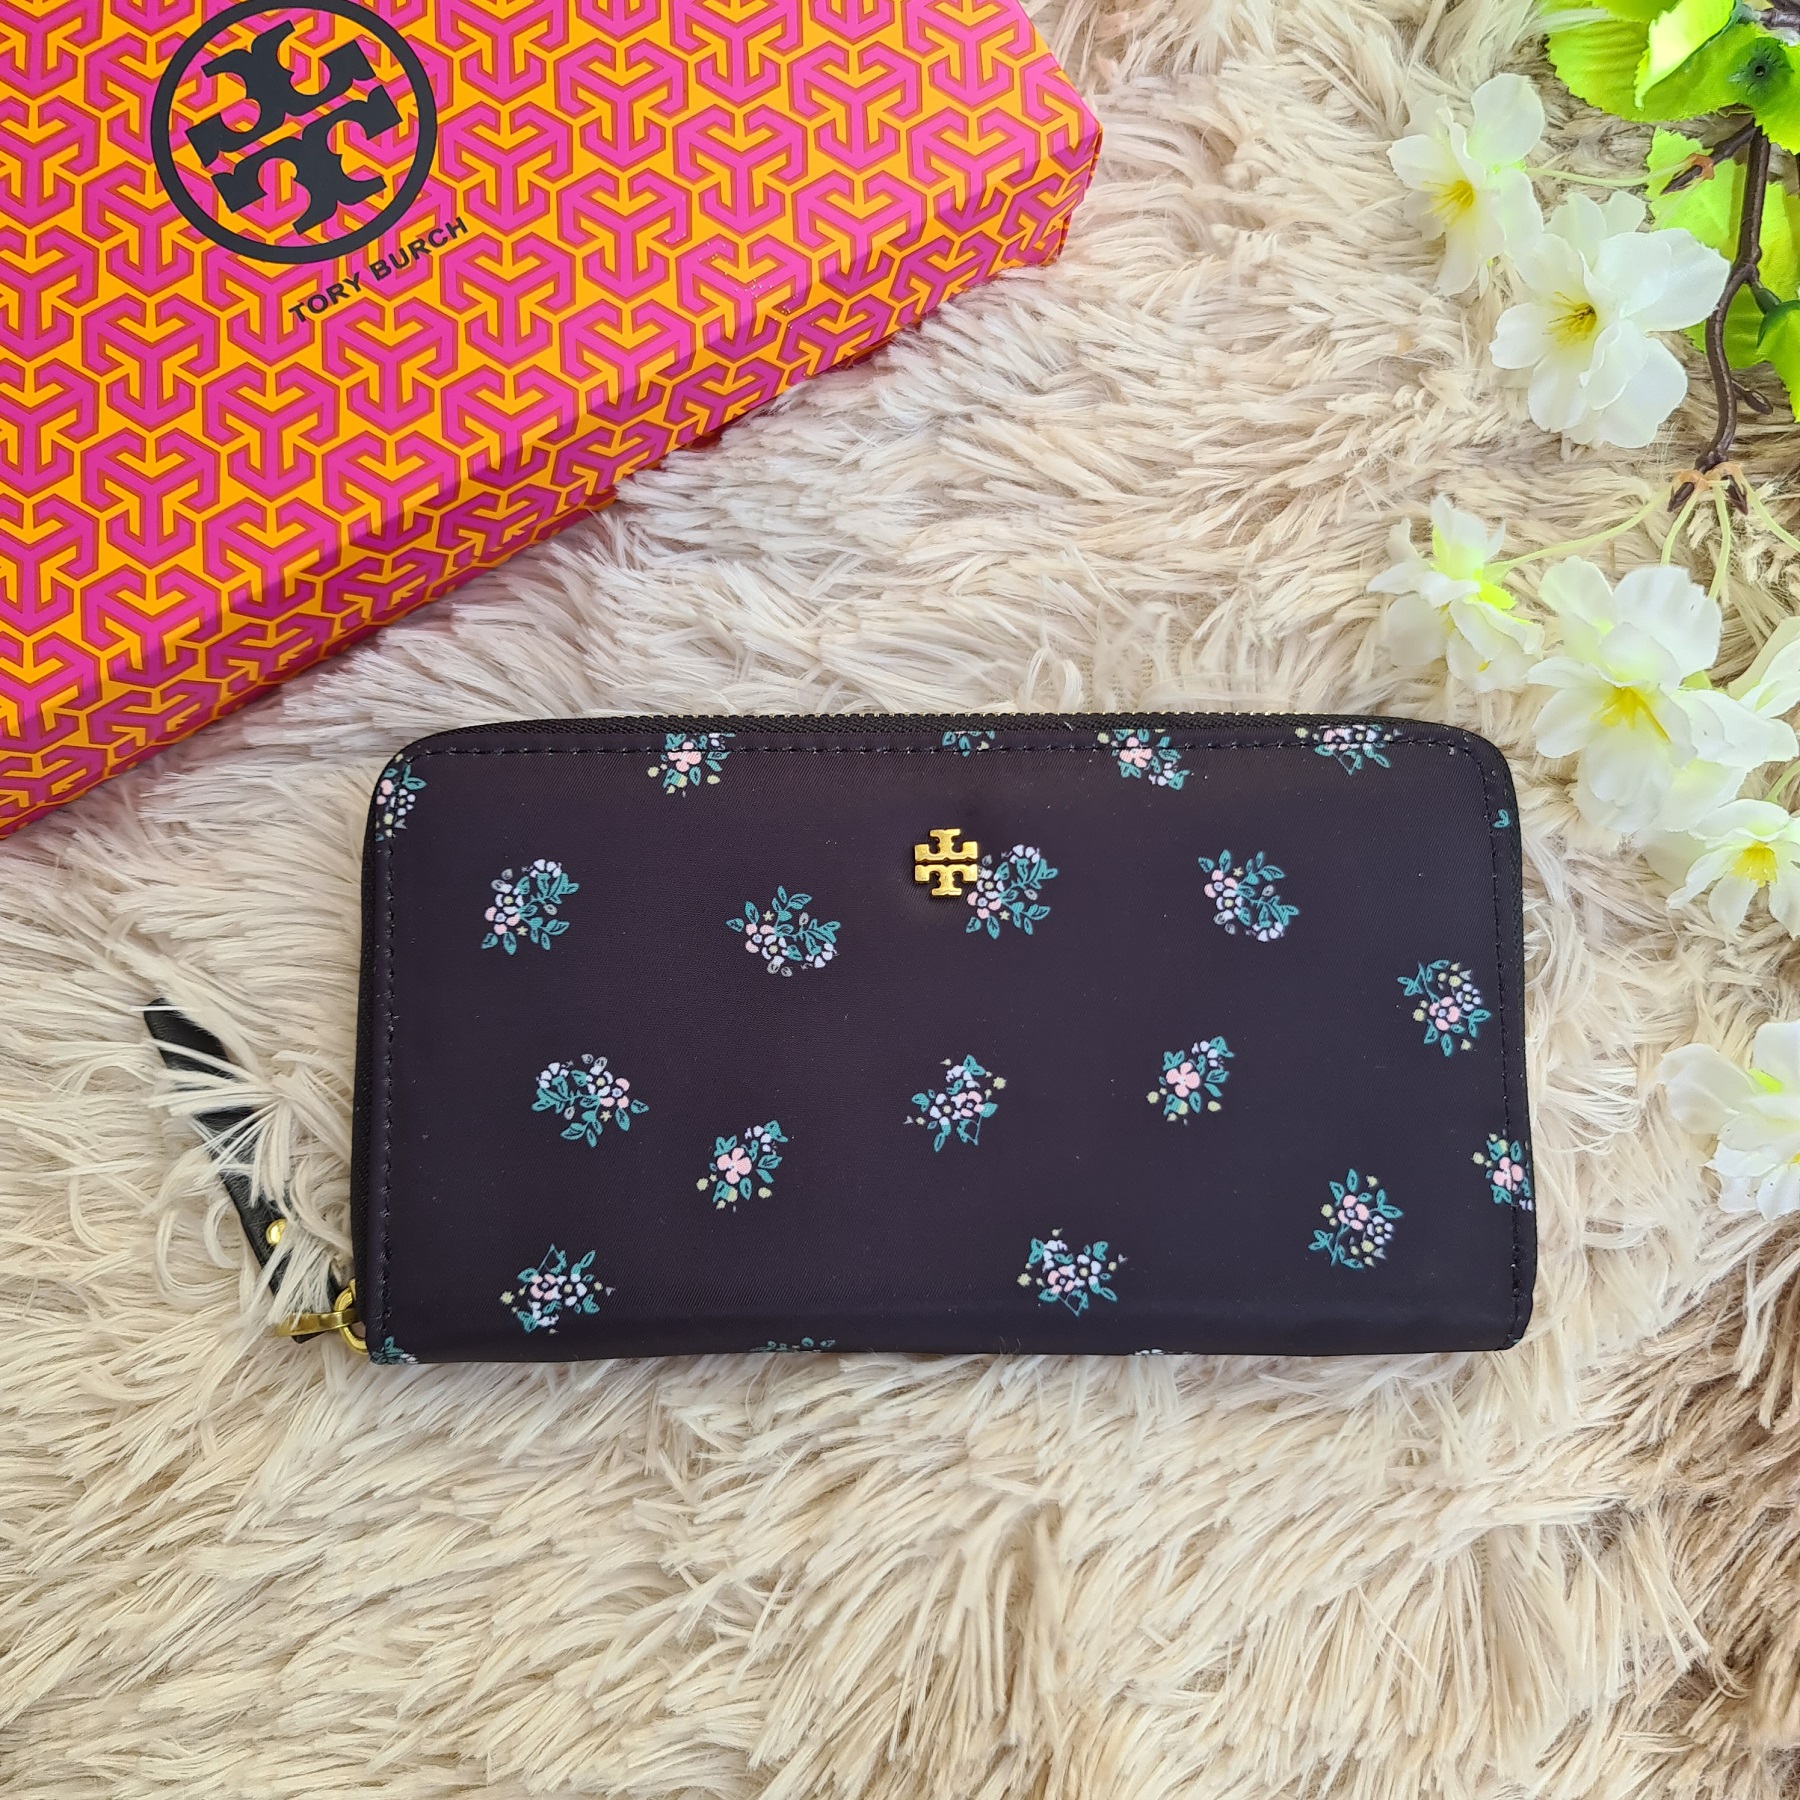 .Y . Robinson Zip Continental Wallet in Black Nylon with  Floral Daisy Printed Design - Women's Classic Long Wallet | Lazada PH